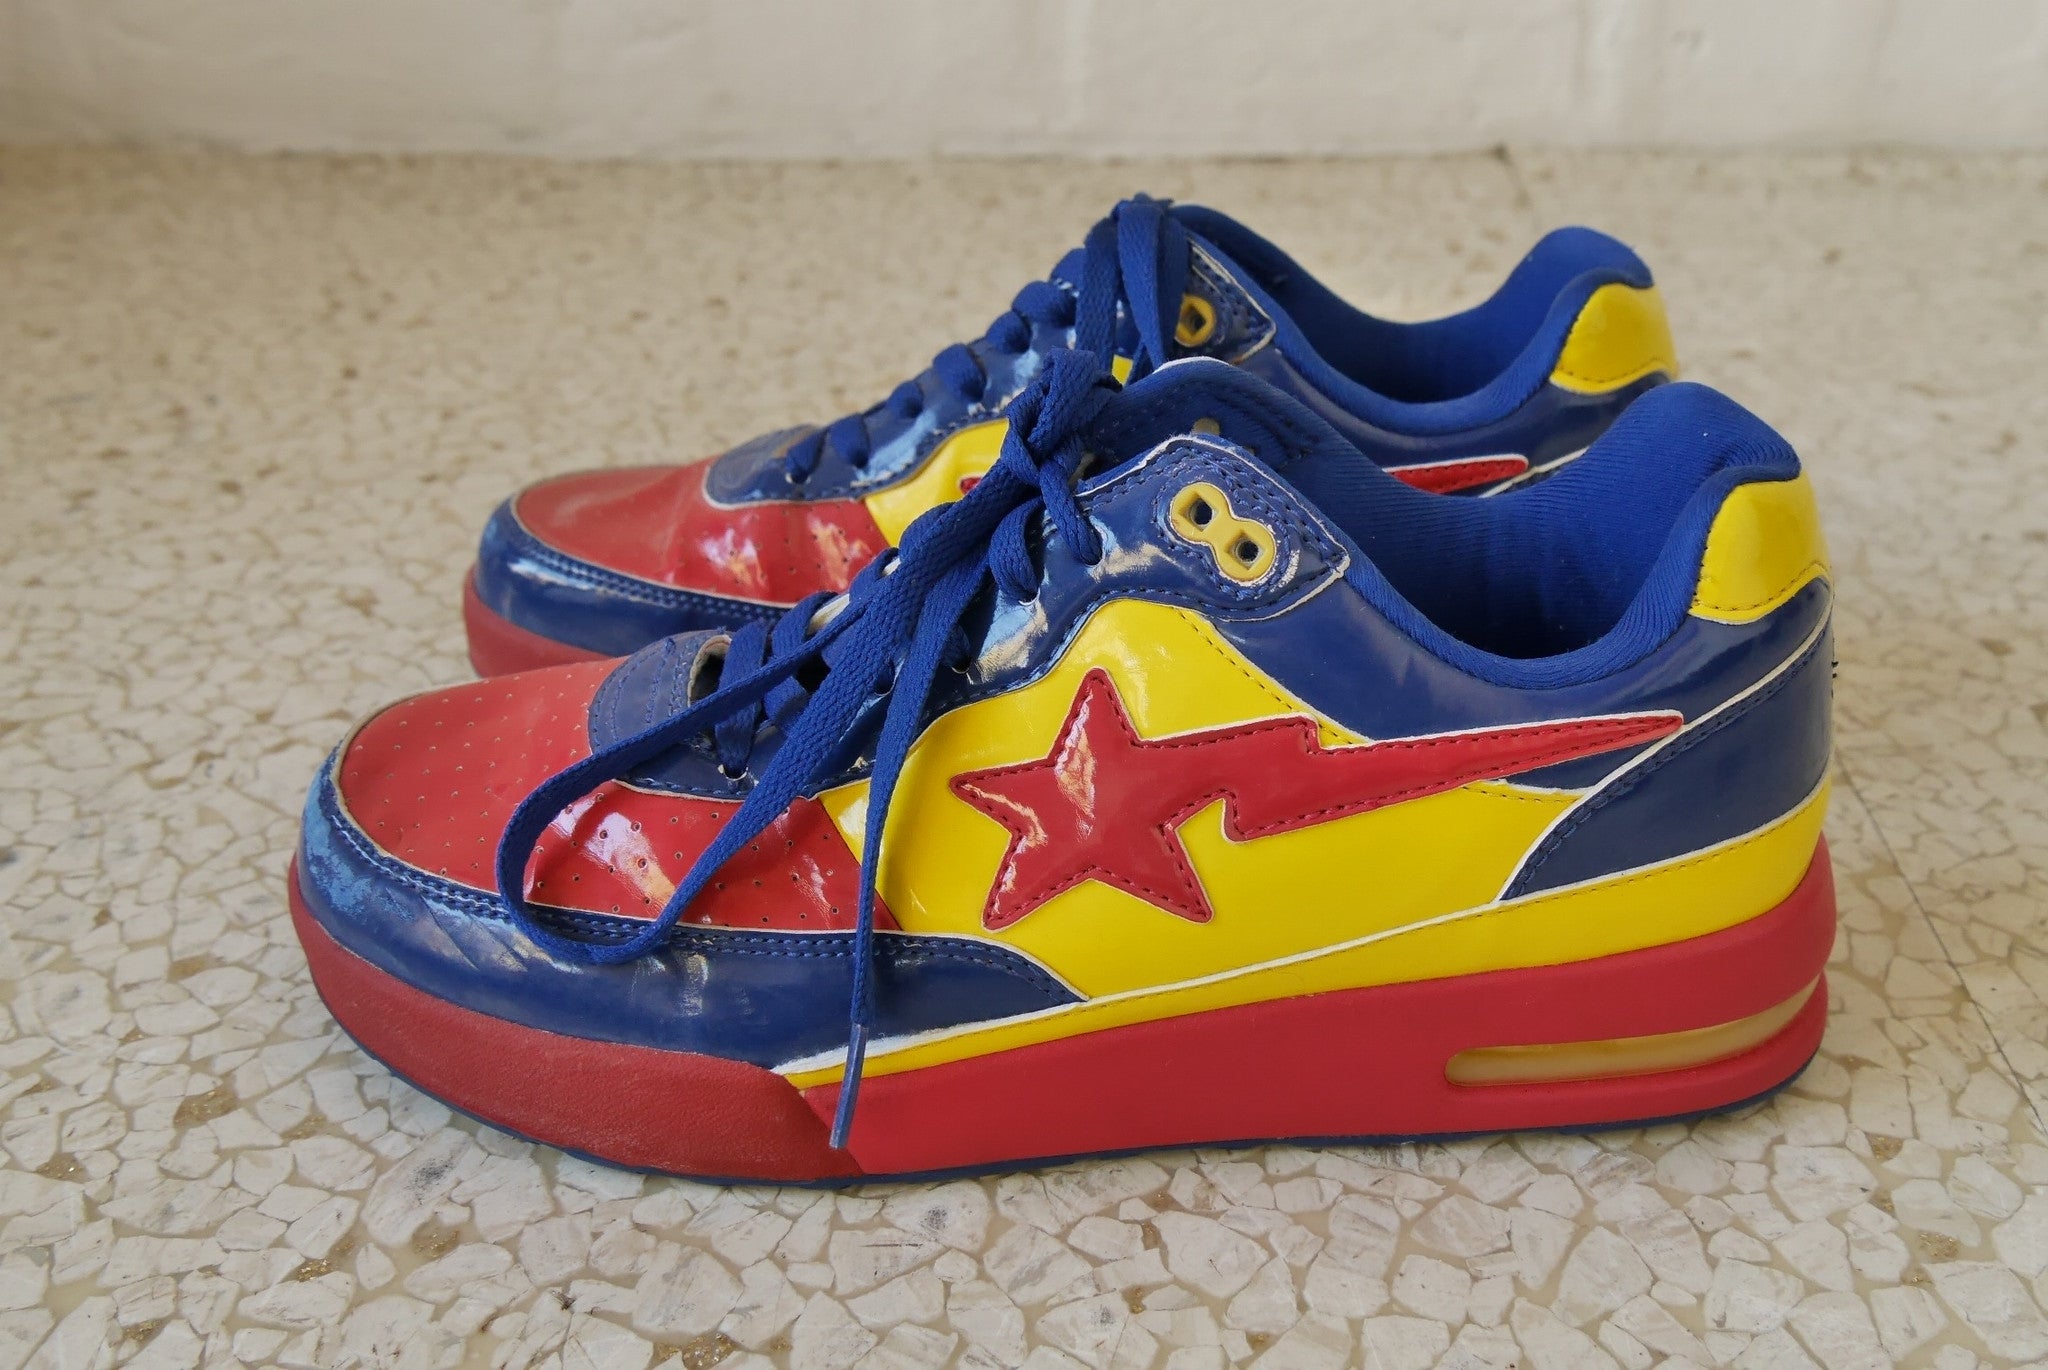 Emilio Pucci, Shoes, Rare Emilio Pucci Sneakers Yellow Red Blue Size 6  Italy Box And Shoe Bag